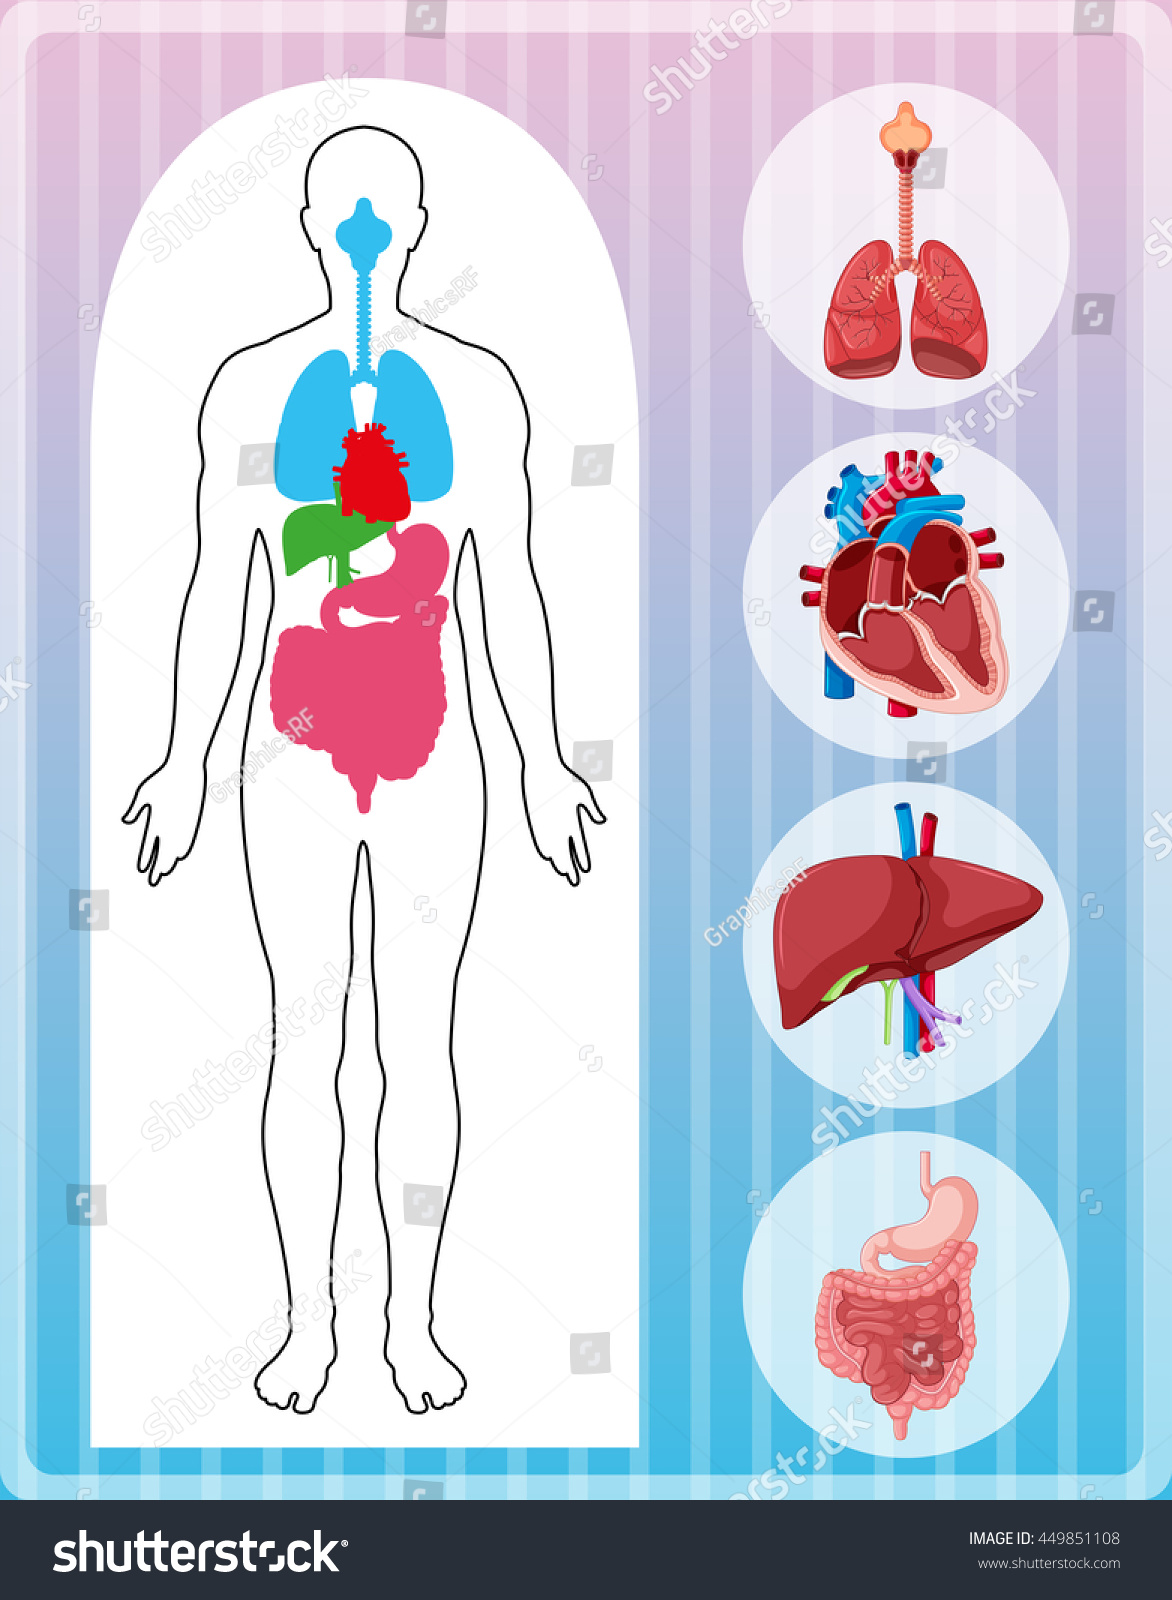 Human Anatomy With Many Organs Illustration - 449851108 : Shutterstock